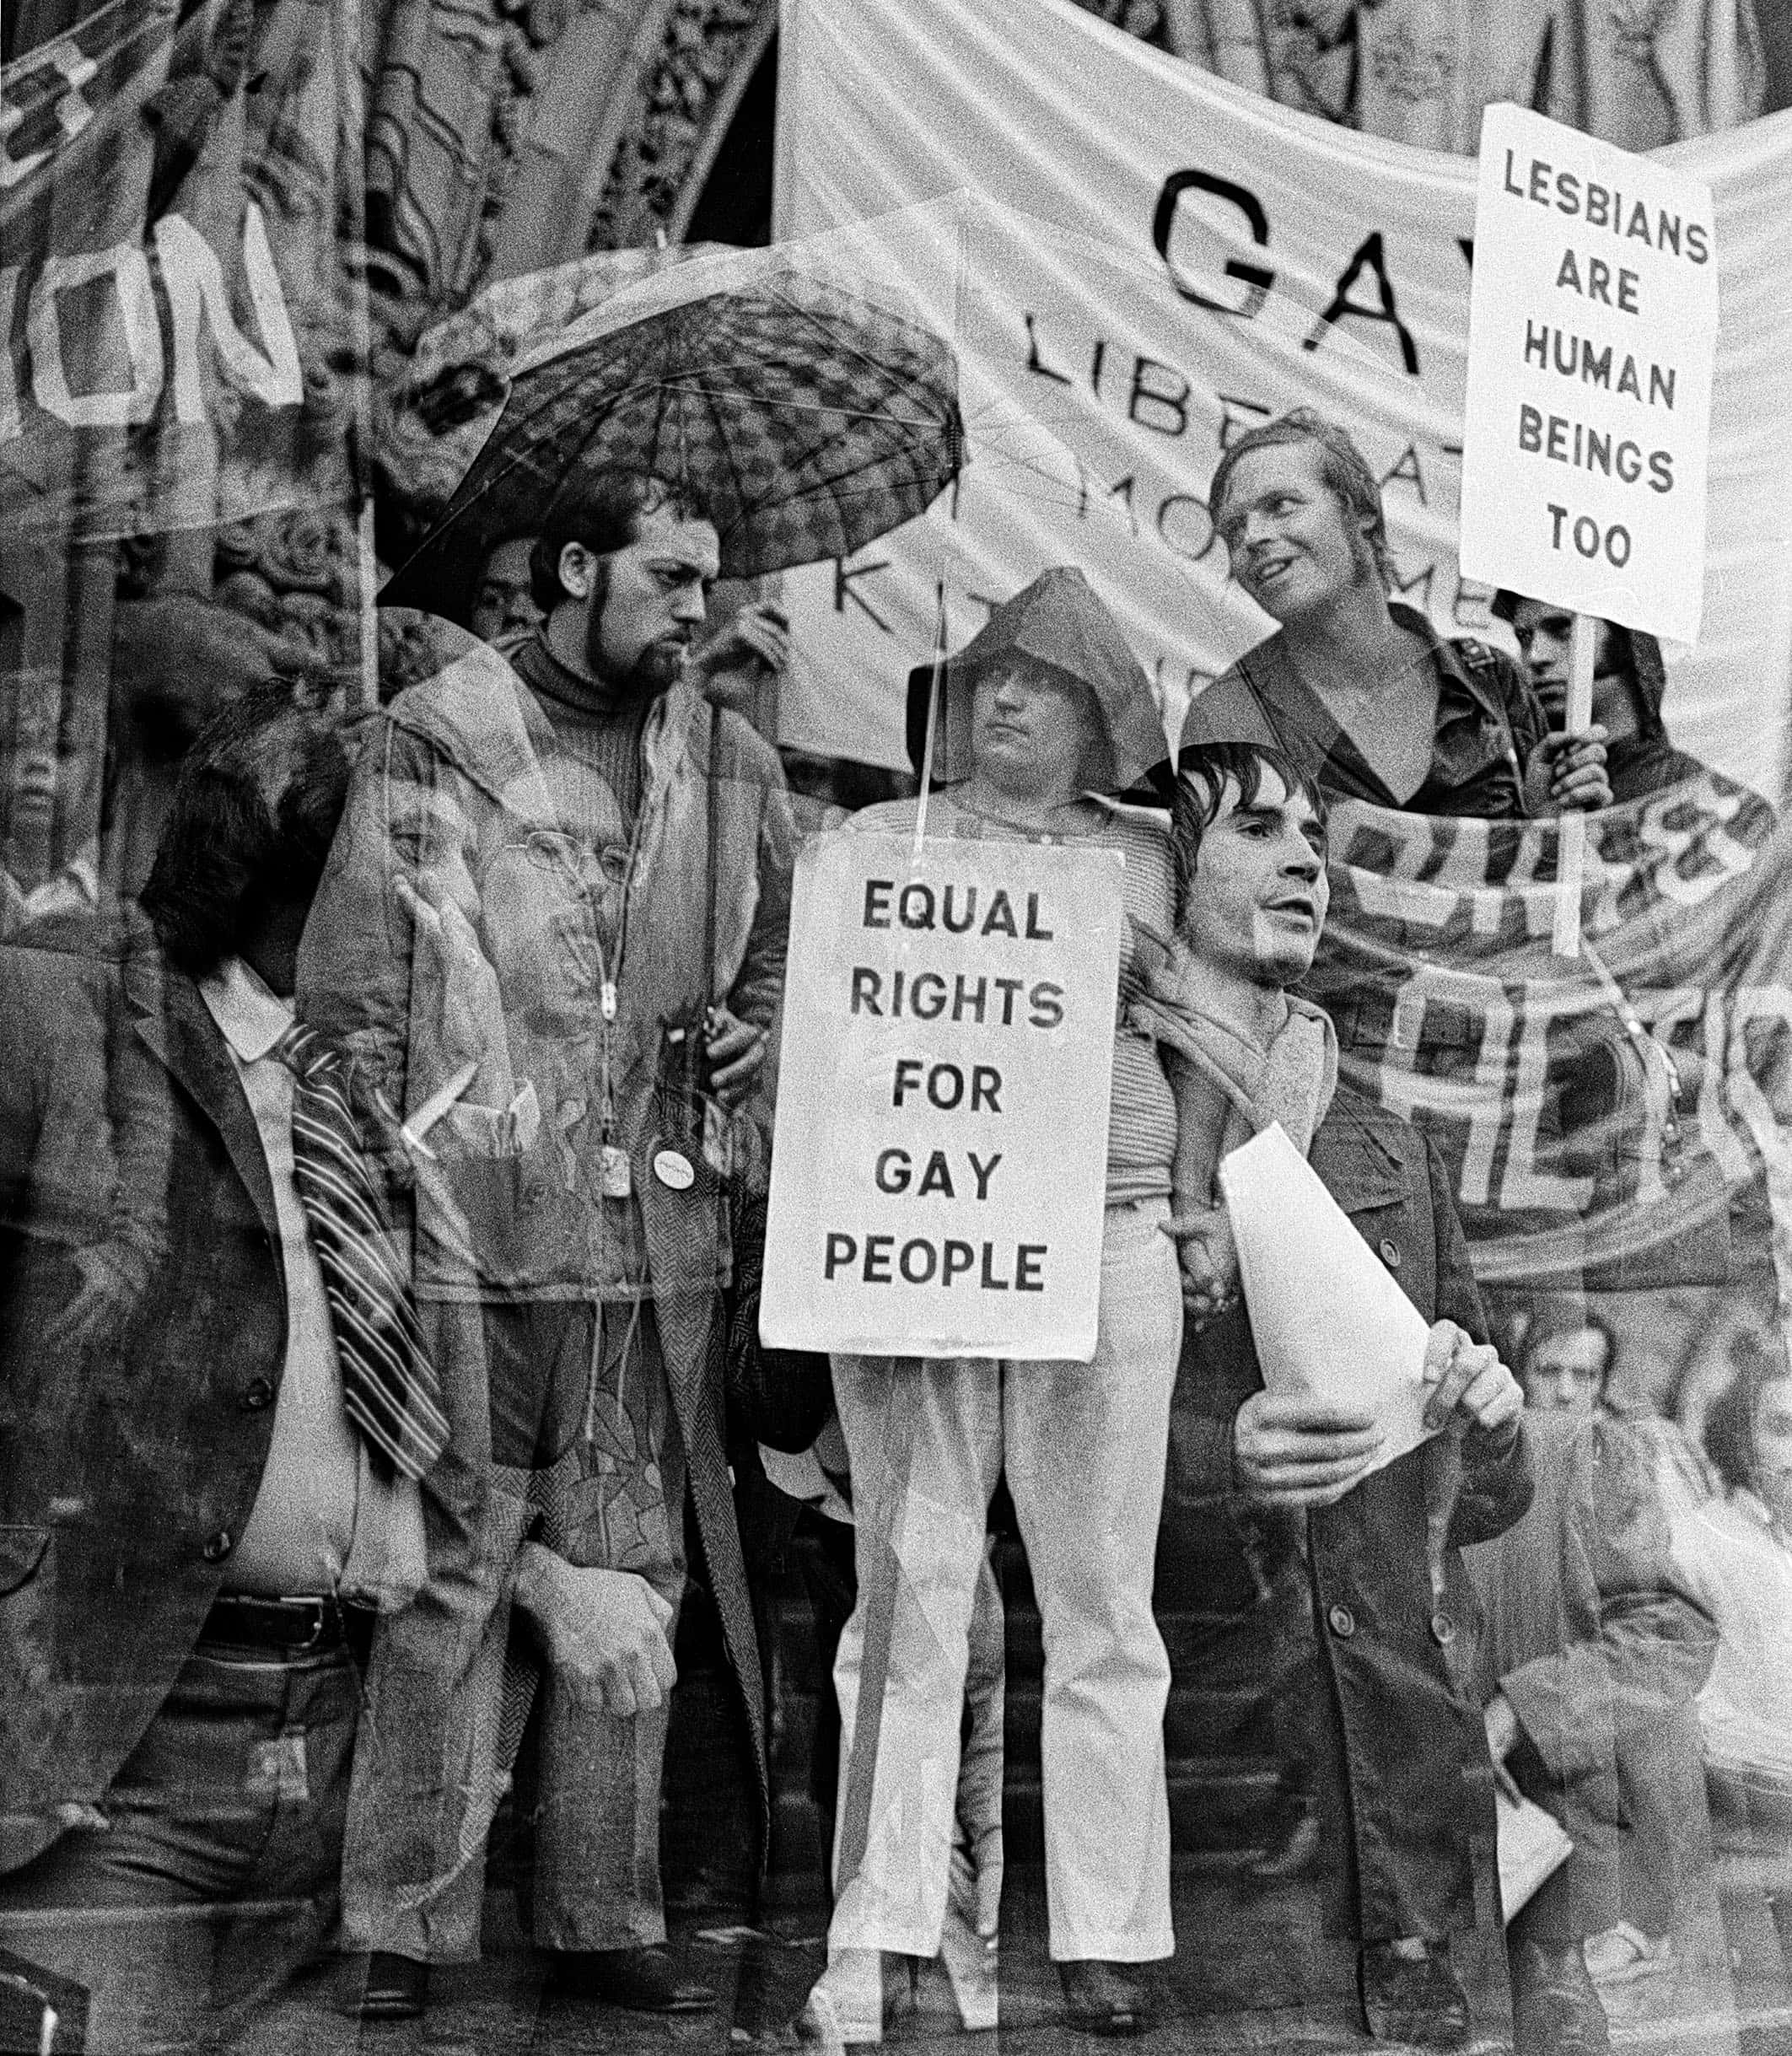 protesters at the We Demand protest in Ottawa 1971 hold a sign that says "Equal Rights for Gay People"